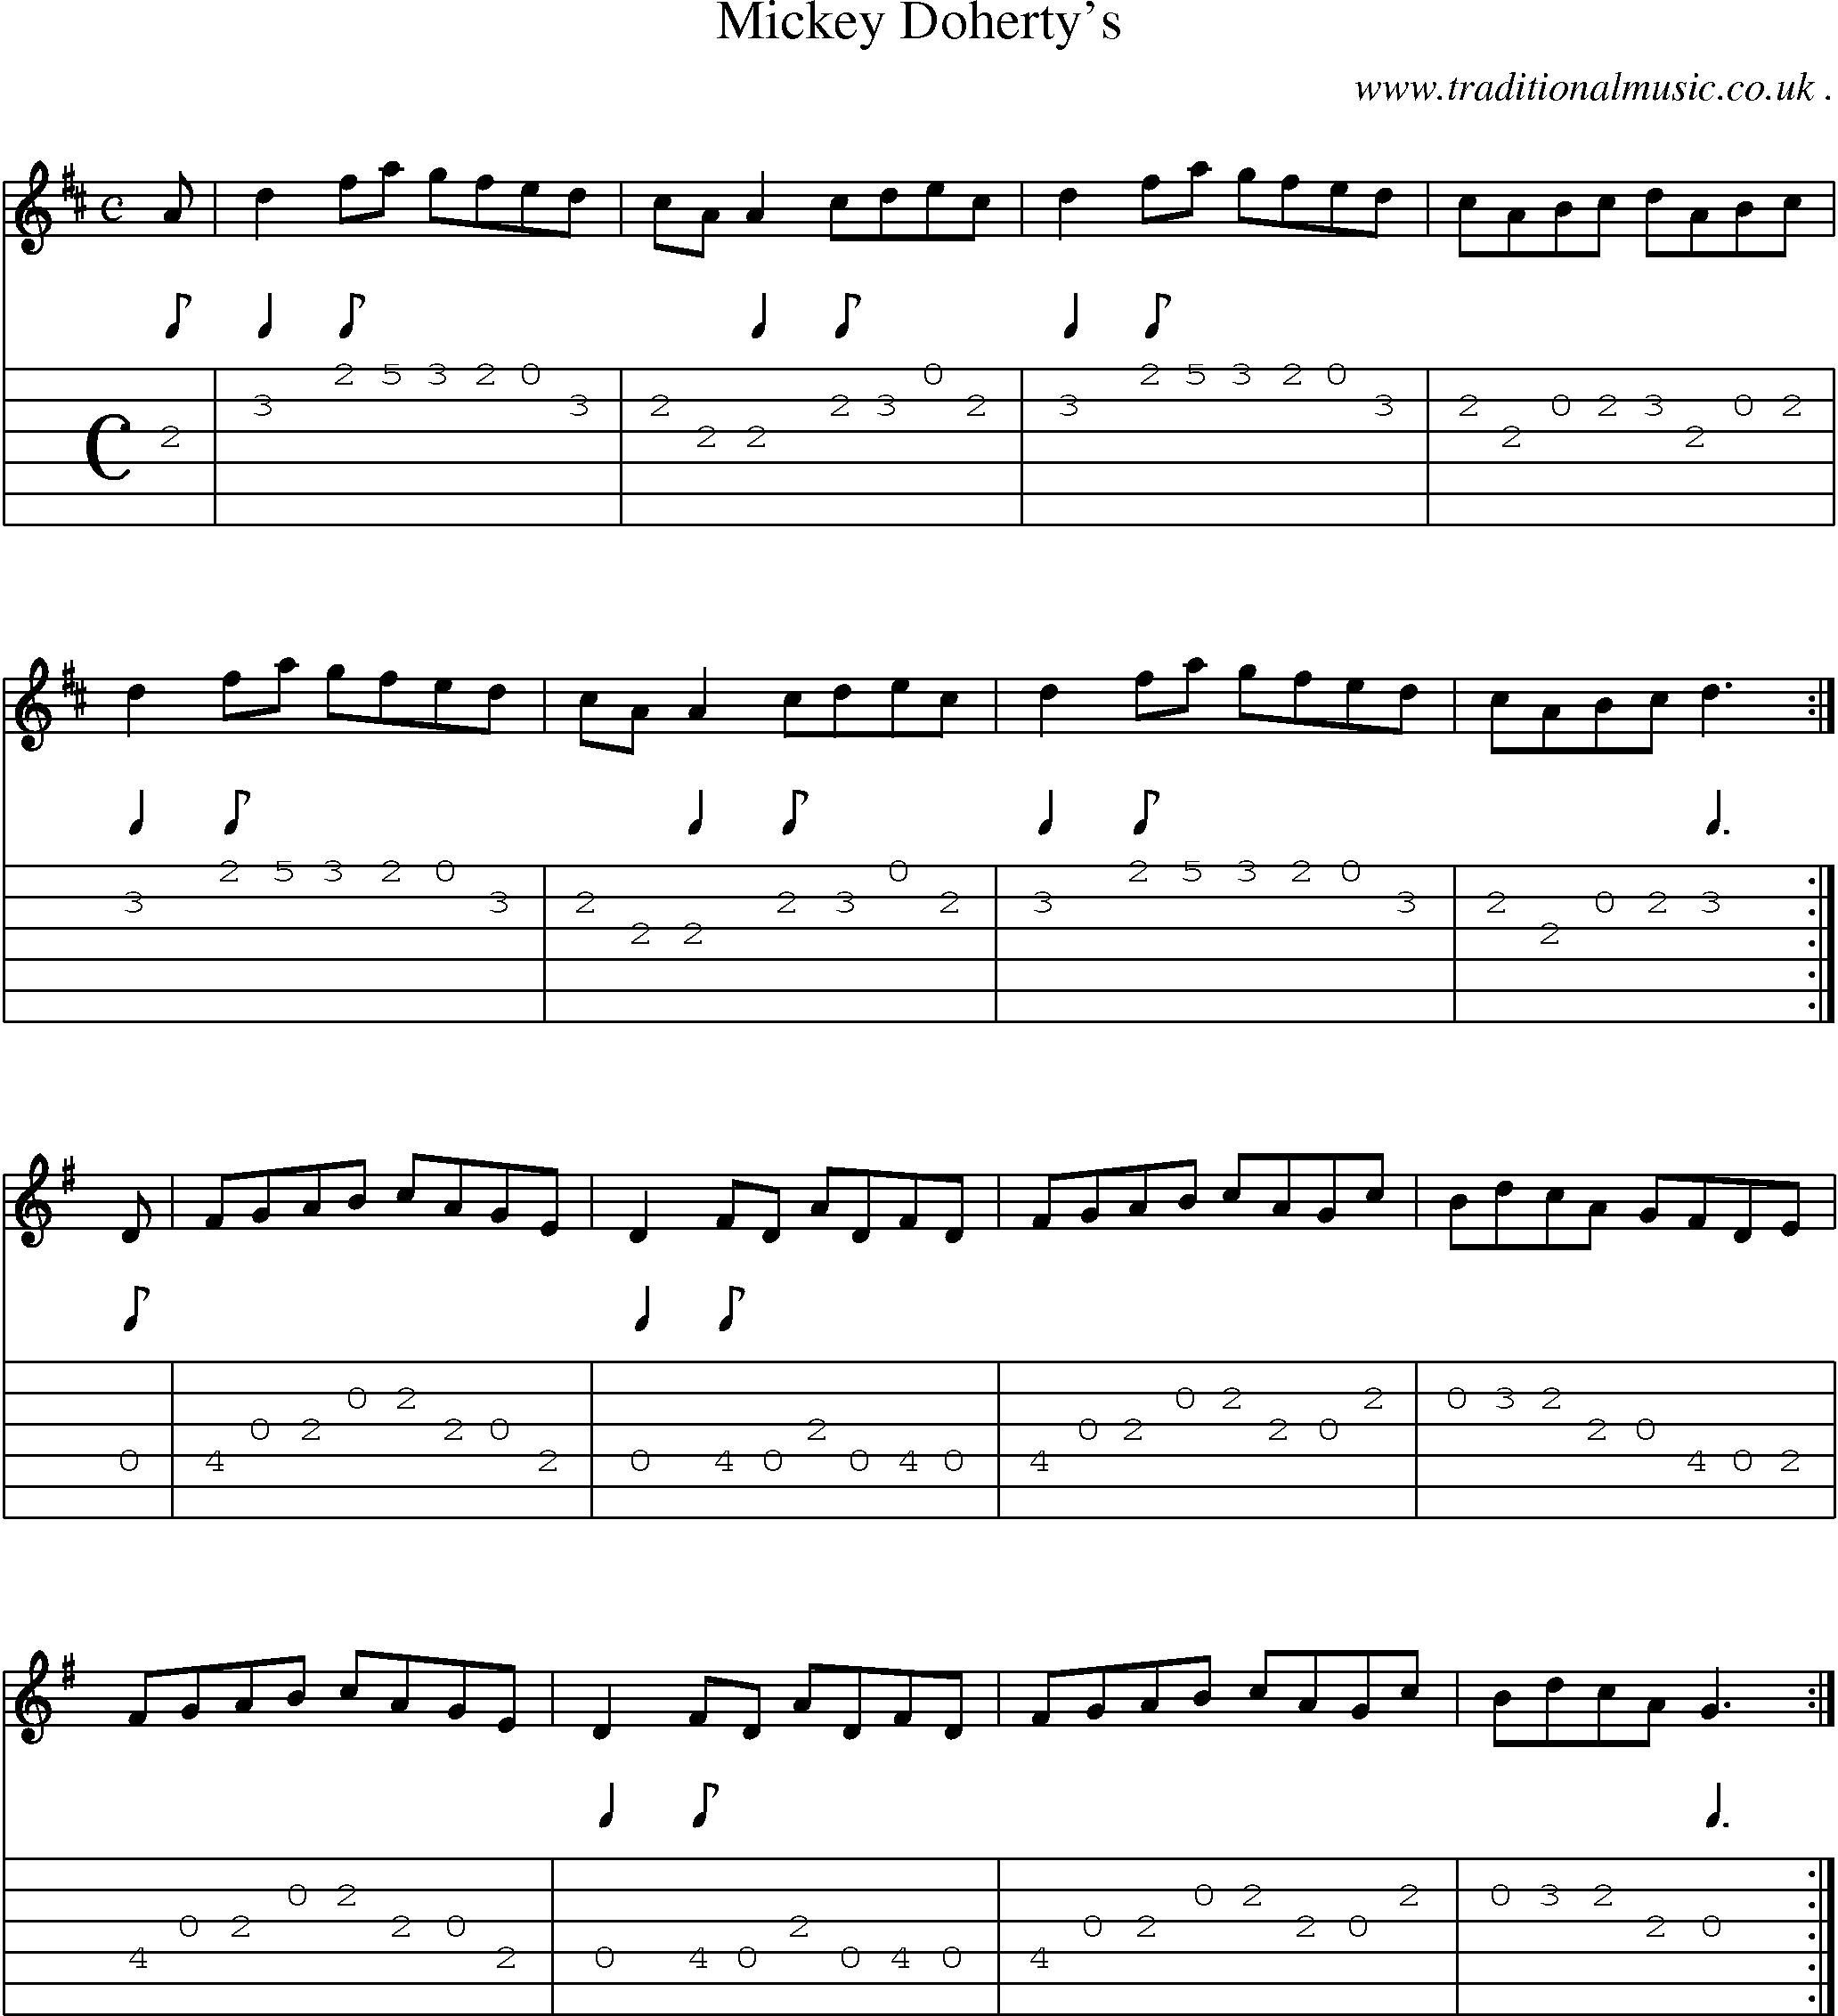 Sheet-Music and Guitar Tabs for Mickey Dohertys